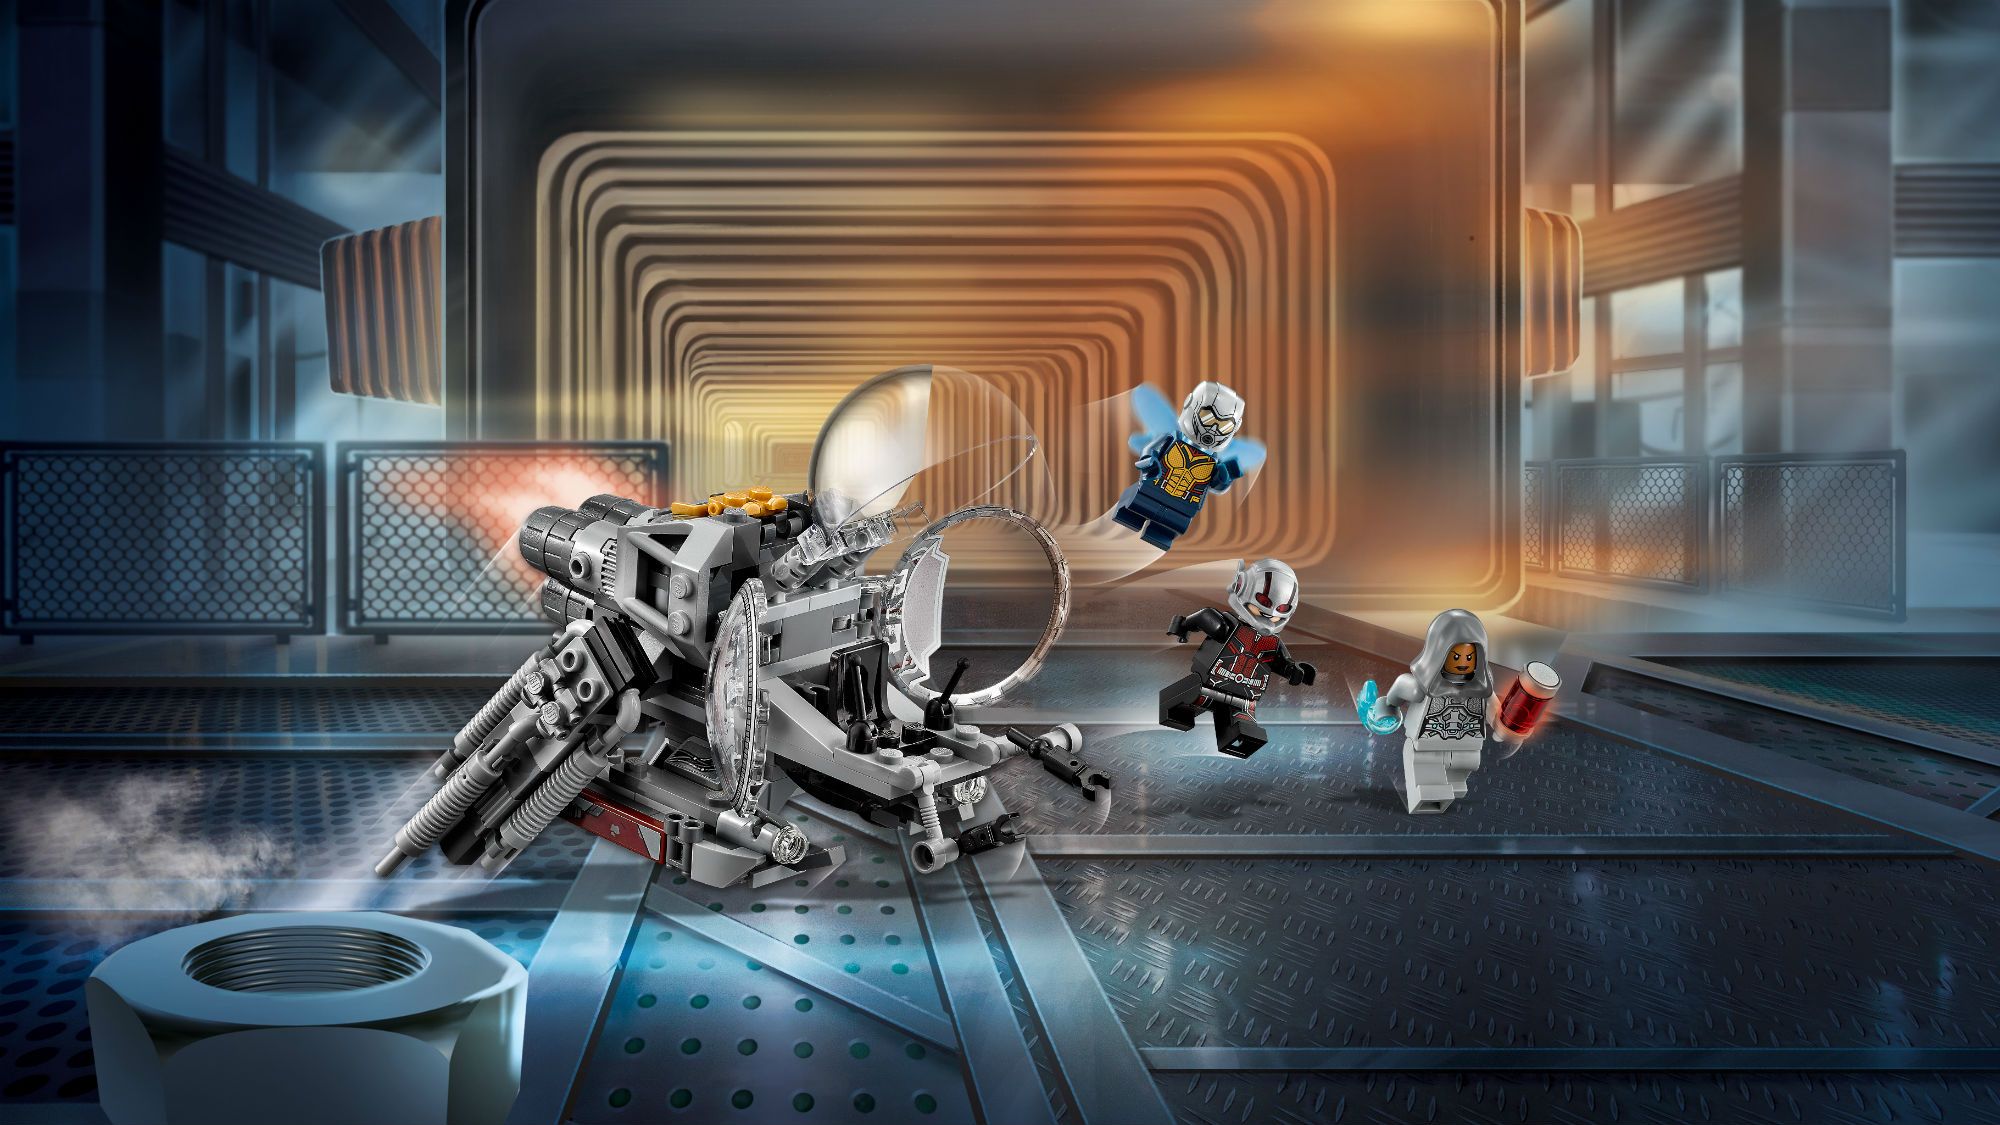 AntMan and the Wasp LEGO Set Teases Quantum Realm Exploration